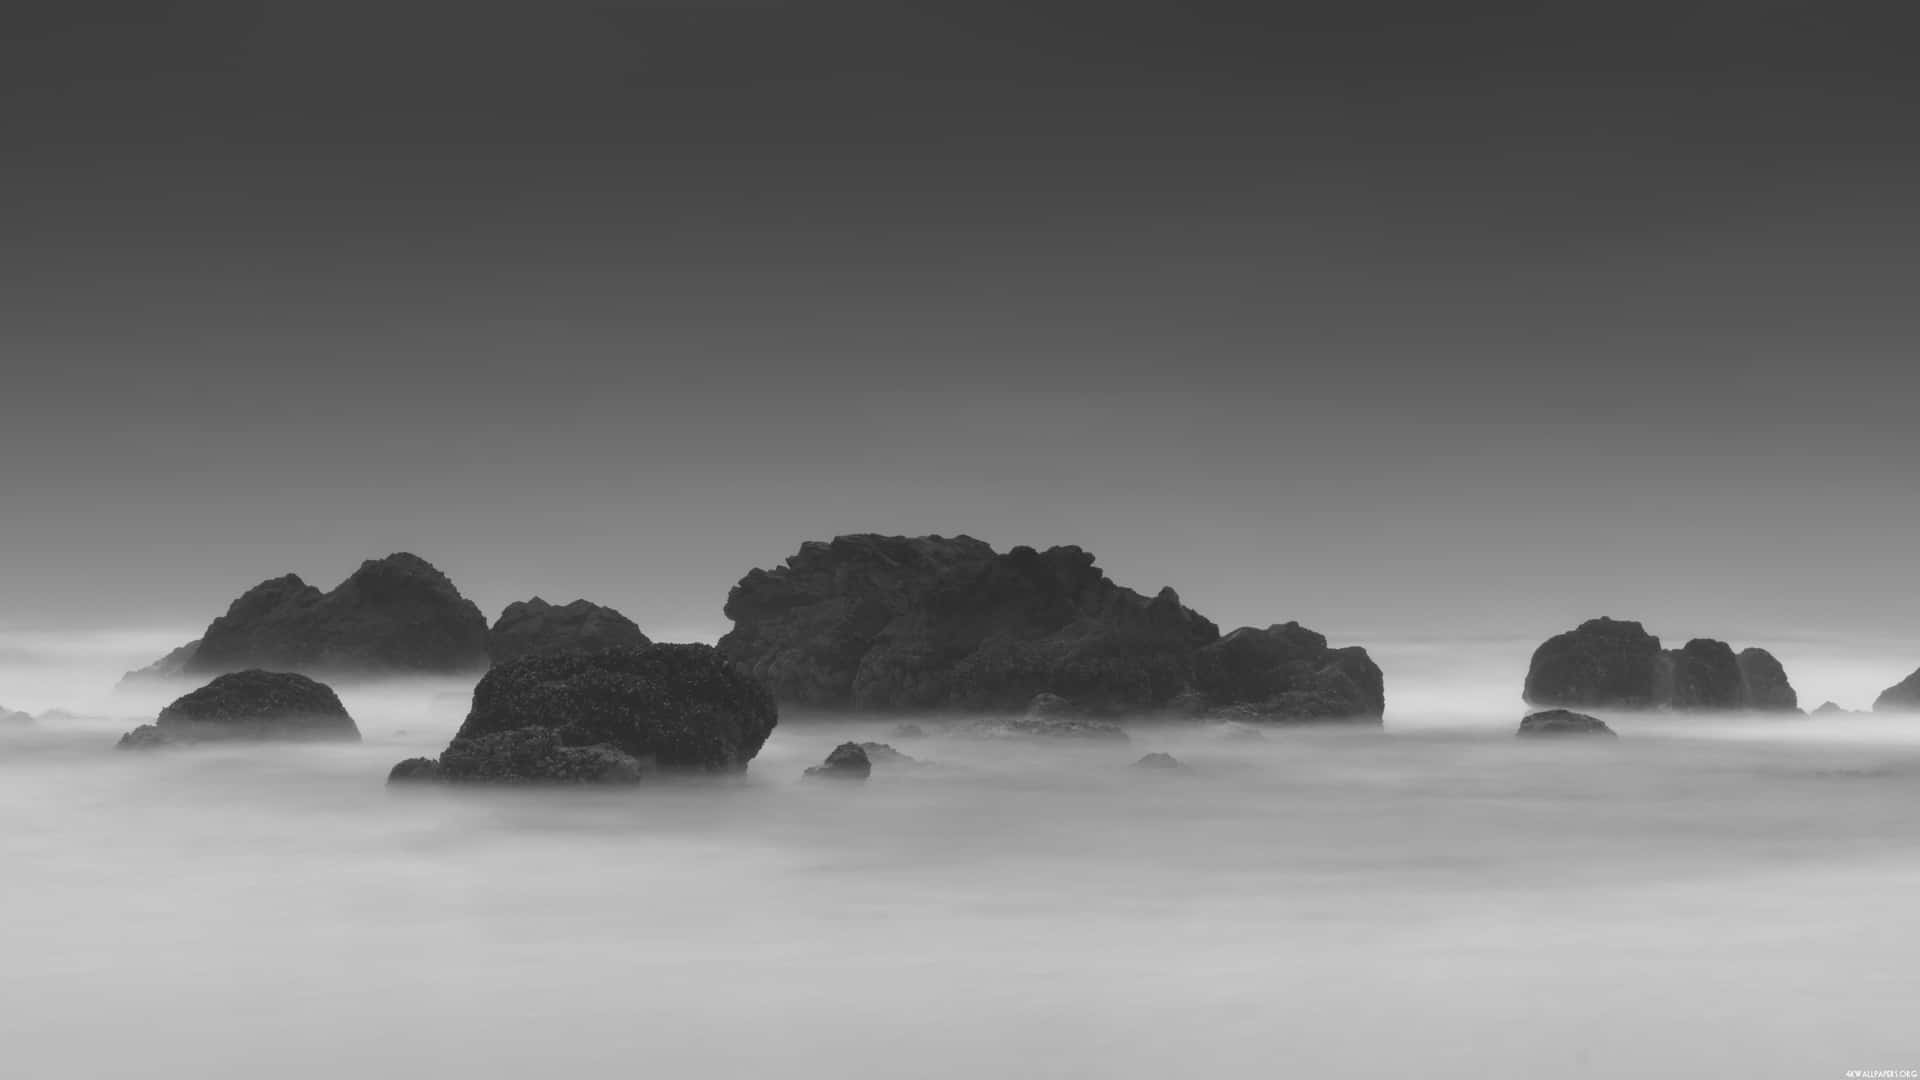 A Black And White Photo Of Rocks In The Ocean Wallpaper